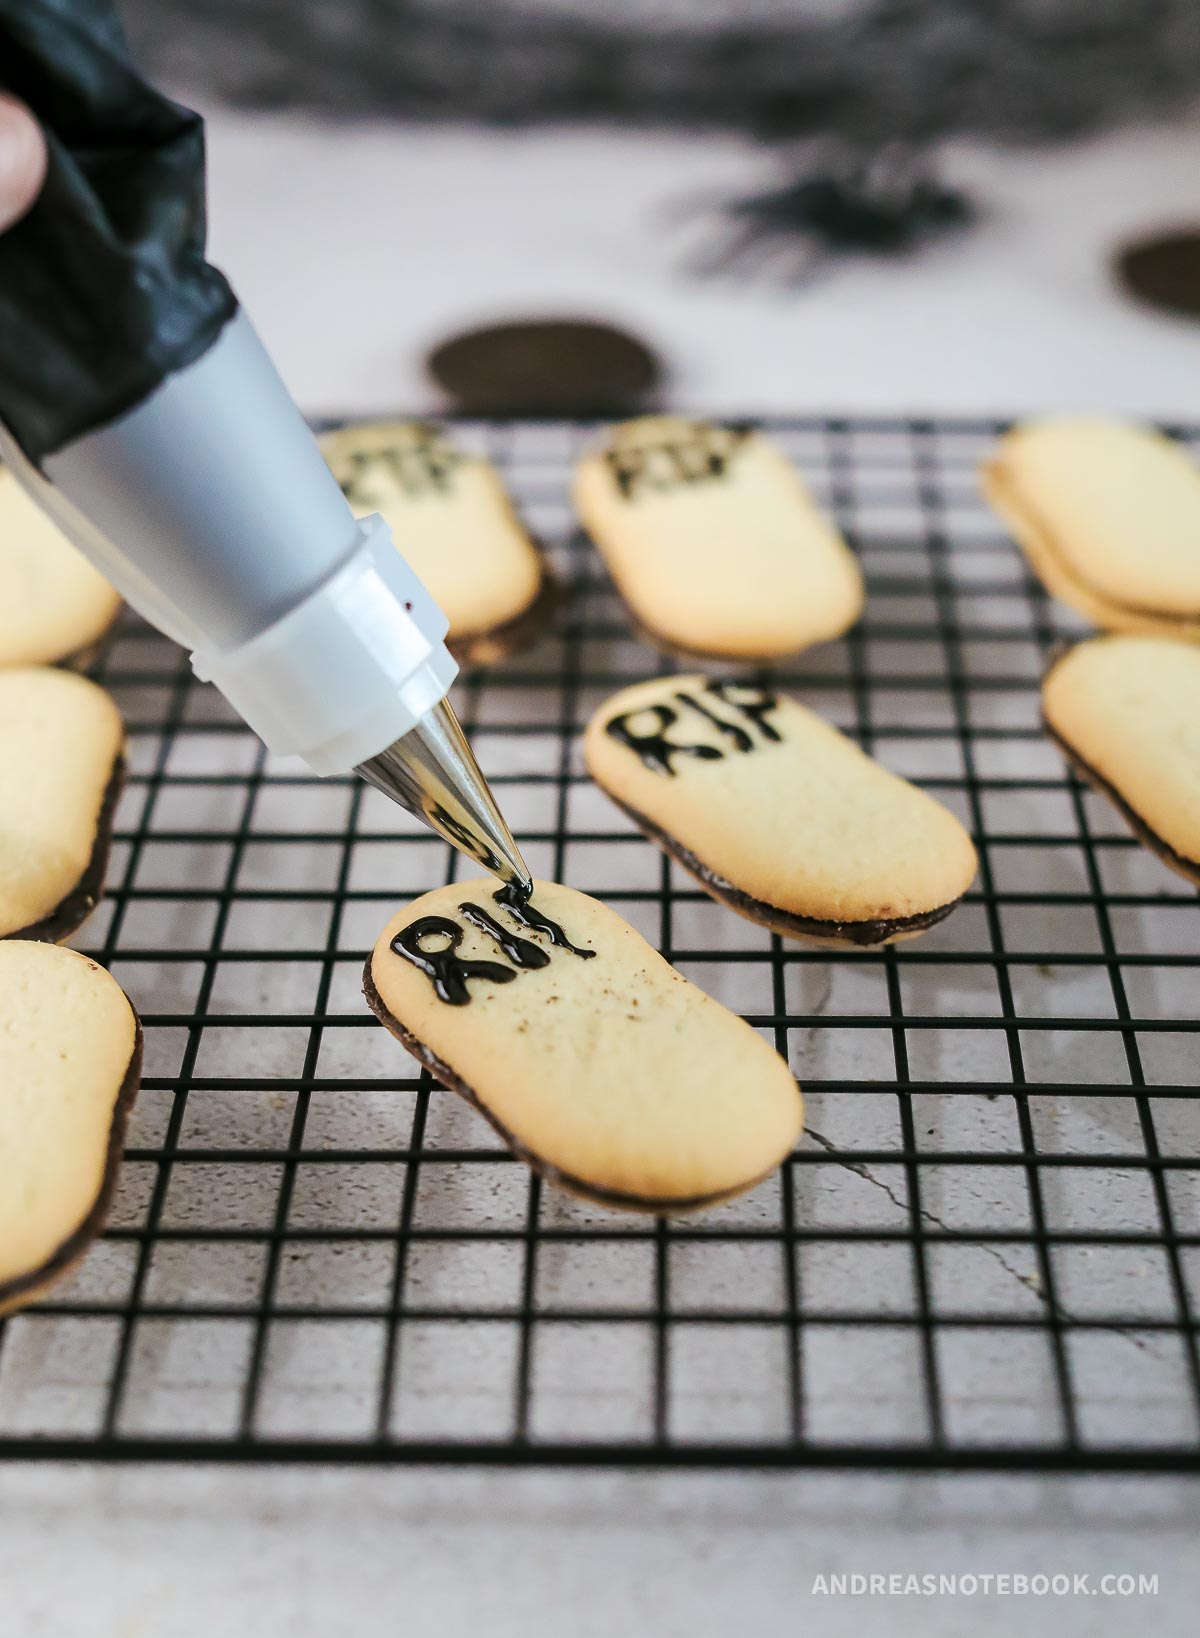 Gel icing writing RIP on Milano cookie.